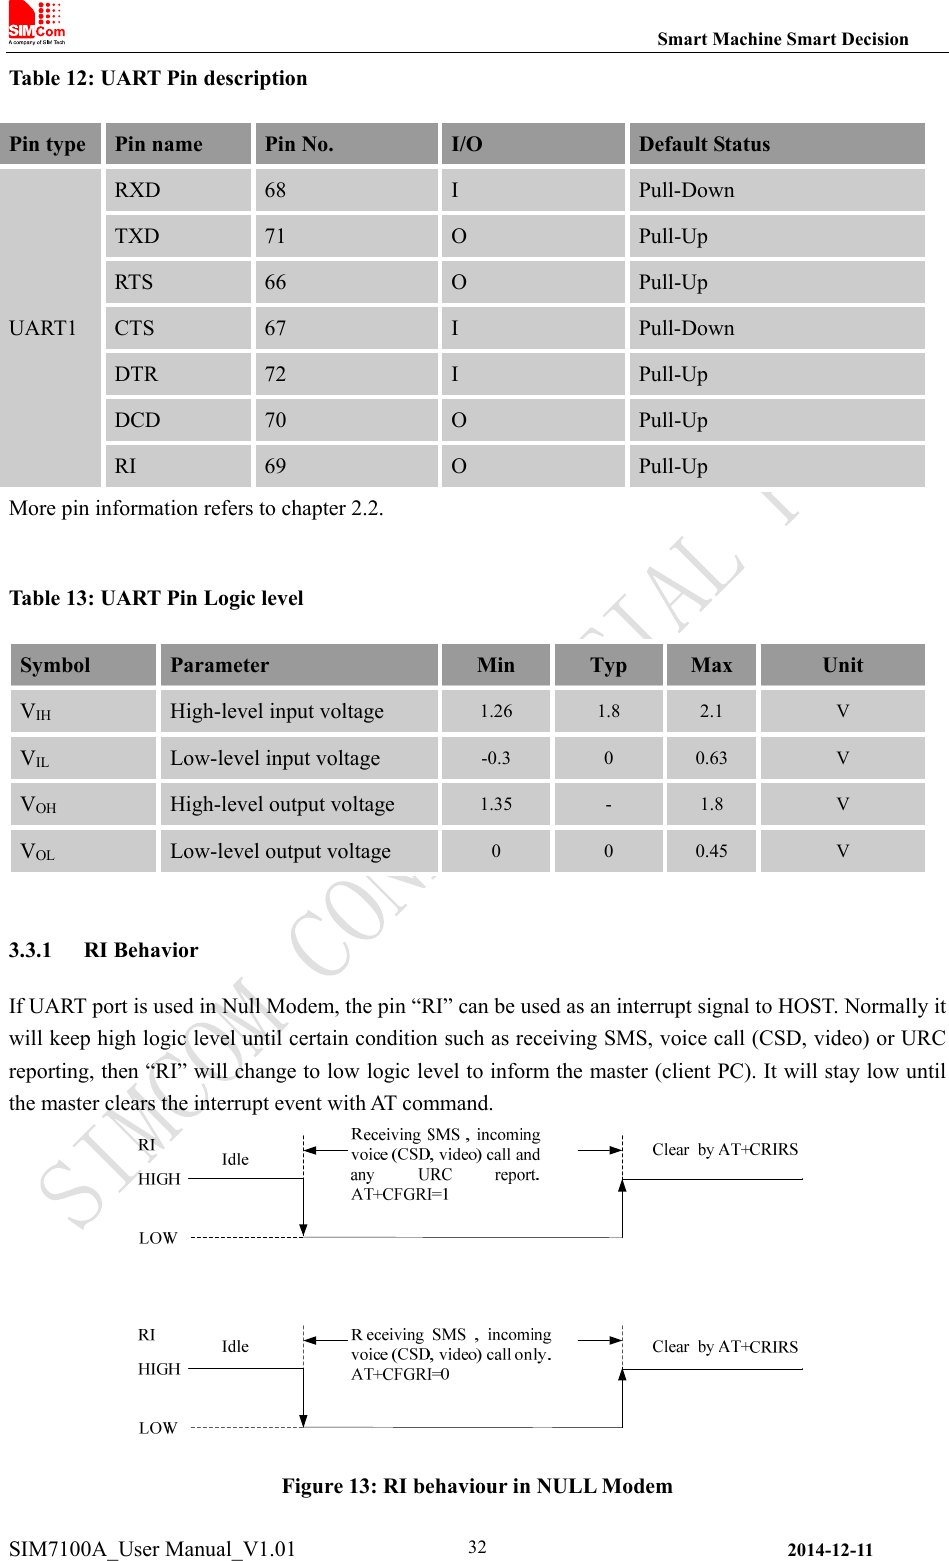                                                                Smart Machine Smart Decision SIM7100A_User Manual_V1.01                2014-12-11 32Table 12: UART Pin description Pin type  Pin name  Pin No.  I/O  Default Status UART1 RXD  68  I  Pull-Down TXD  71  O  Pull-Up RTS  66  O  Pull-Up CTS  67  I  Pull-Down DTR  72  I  Pull-Up DCD  70  O  Pull-Up RI  69  O  Pull-Up More pin information refers to chapter 2.2.  Table 13: UART Pin Logic level Symbol  Parameter  Min  Typ  Max  Unit VIH High-level input voltage  1.26  1.8  2.1  V VIL Low-level input voltage  -0.3  0  0.63  V VOH High-level output voltage  1.35  -  1.8  V VOL Low-level output voltage  0  0  0.45  V  3.3.1 RI Behavior If UART port is used in Null Modem, the pin “RI” can be used as an interrupt signal to HOST. Normally it will keep high logic level until certain condition such as receiving SMS, voice call (CSD, video) or URC reporting, then “RI” will change to low logic level to inform the master (client PC). It will stay low until the master clears the interrupt event with AT command.  Figure 13: RI behaviour in NULL Modem 